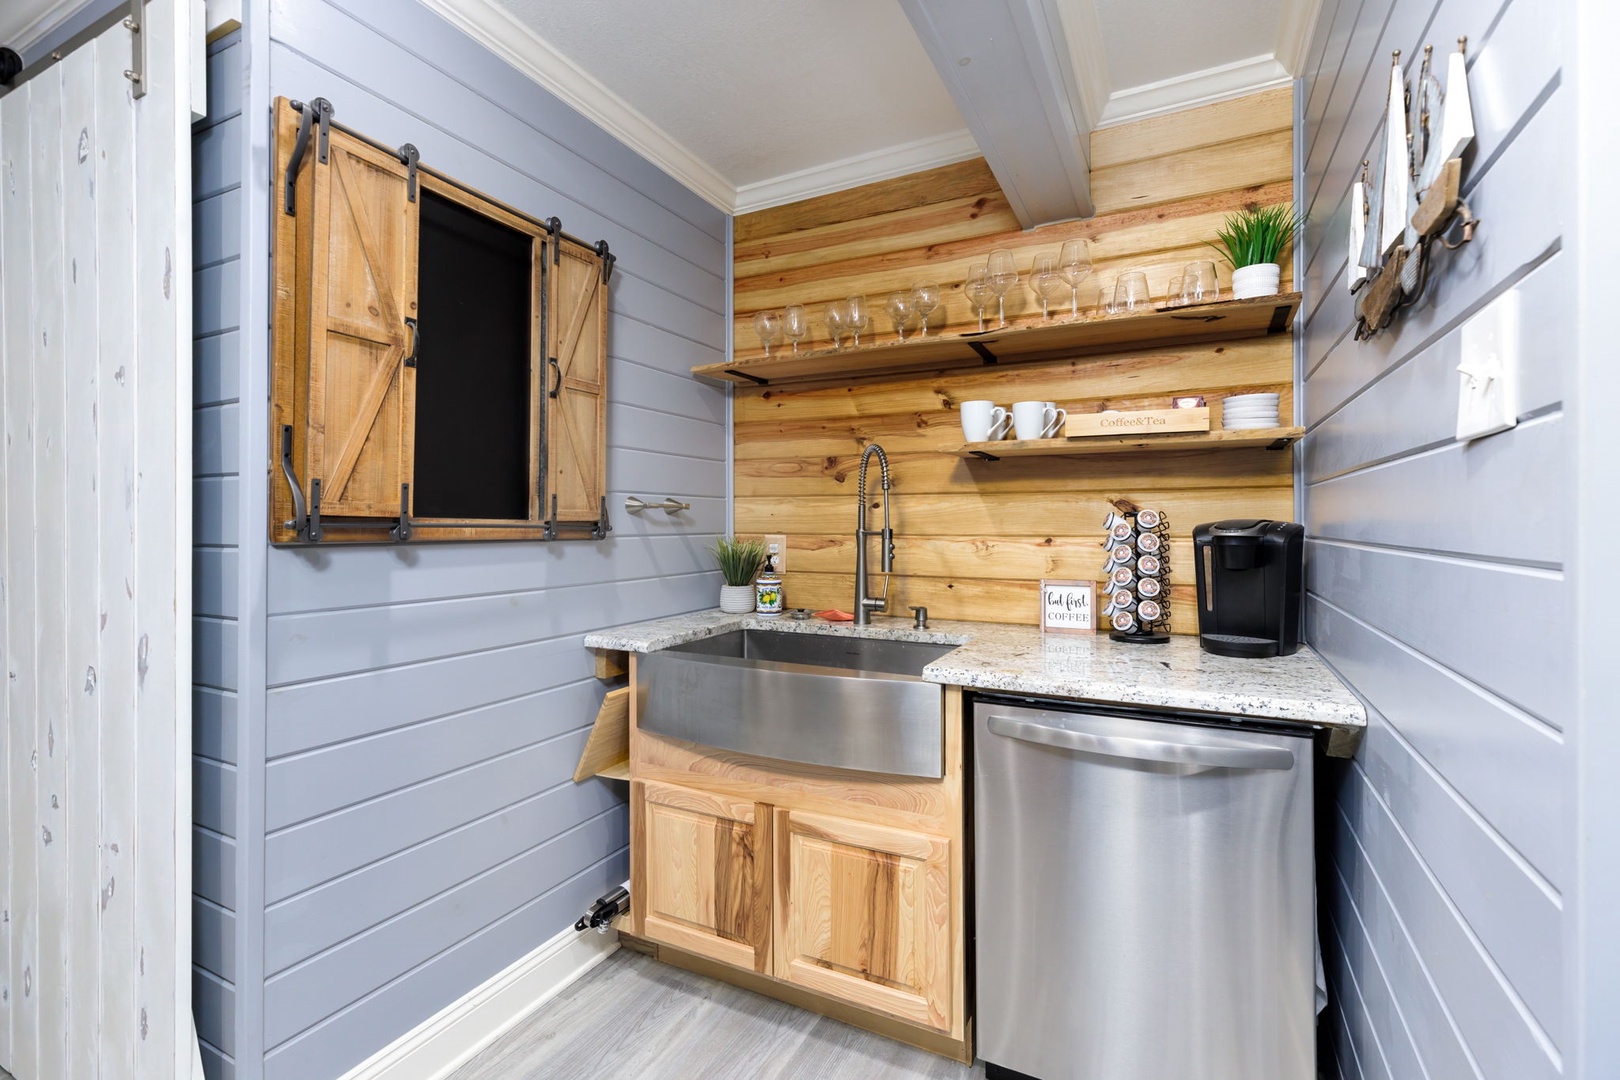 The cabin’s inviting kitchen offers ample space & all the comforts of home